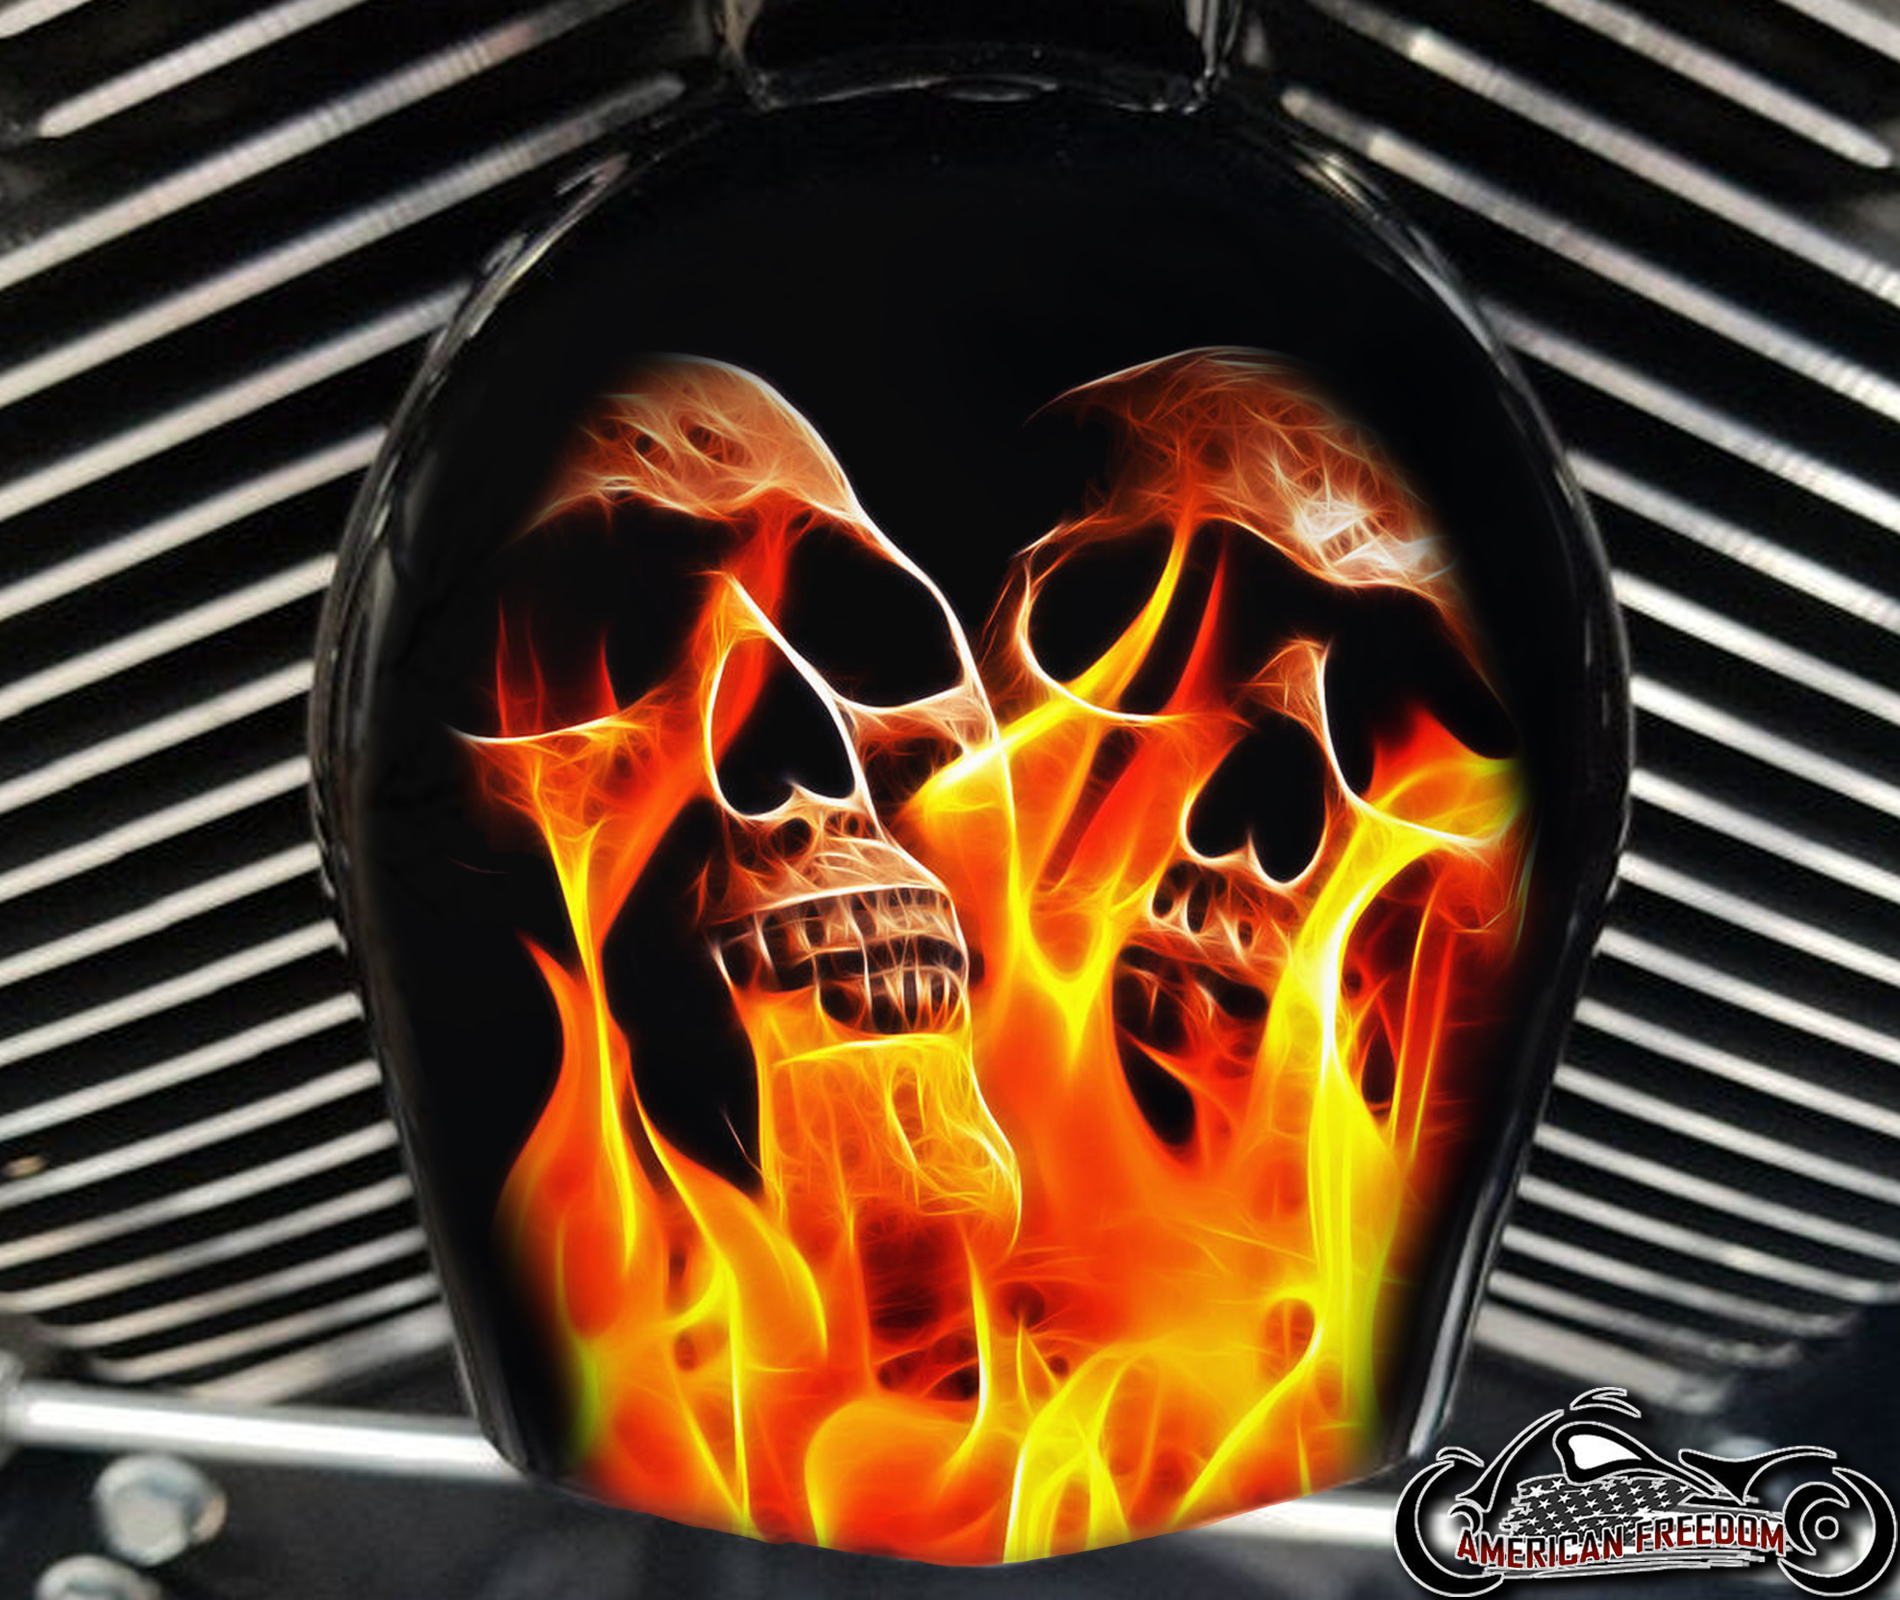 Custom Horn Cover - Skulls With Flame